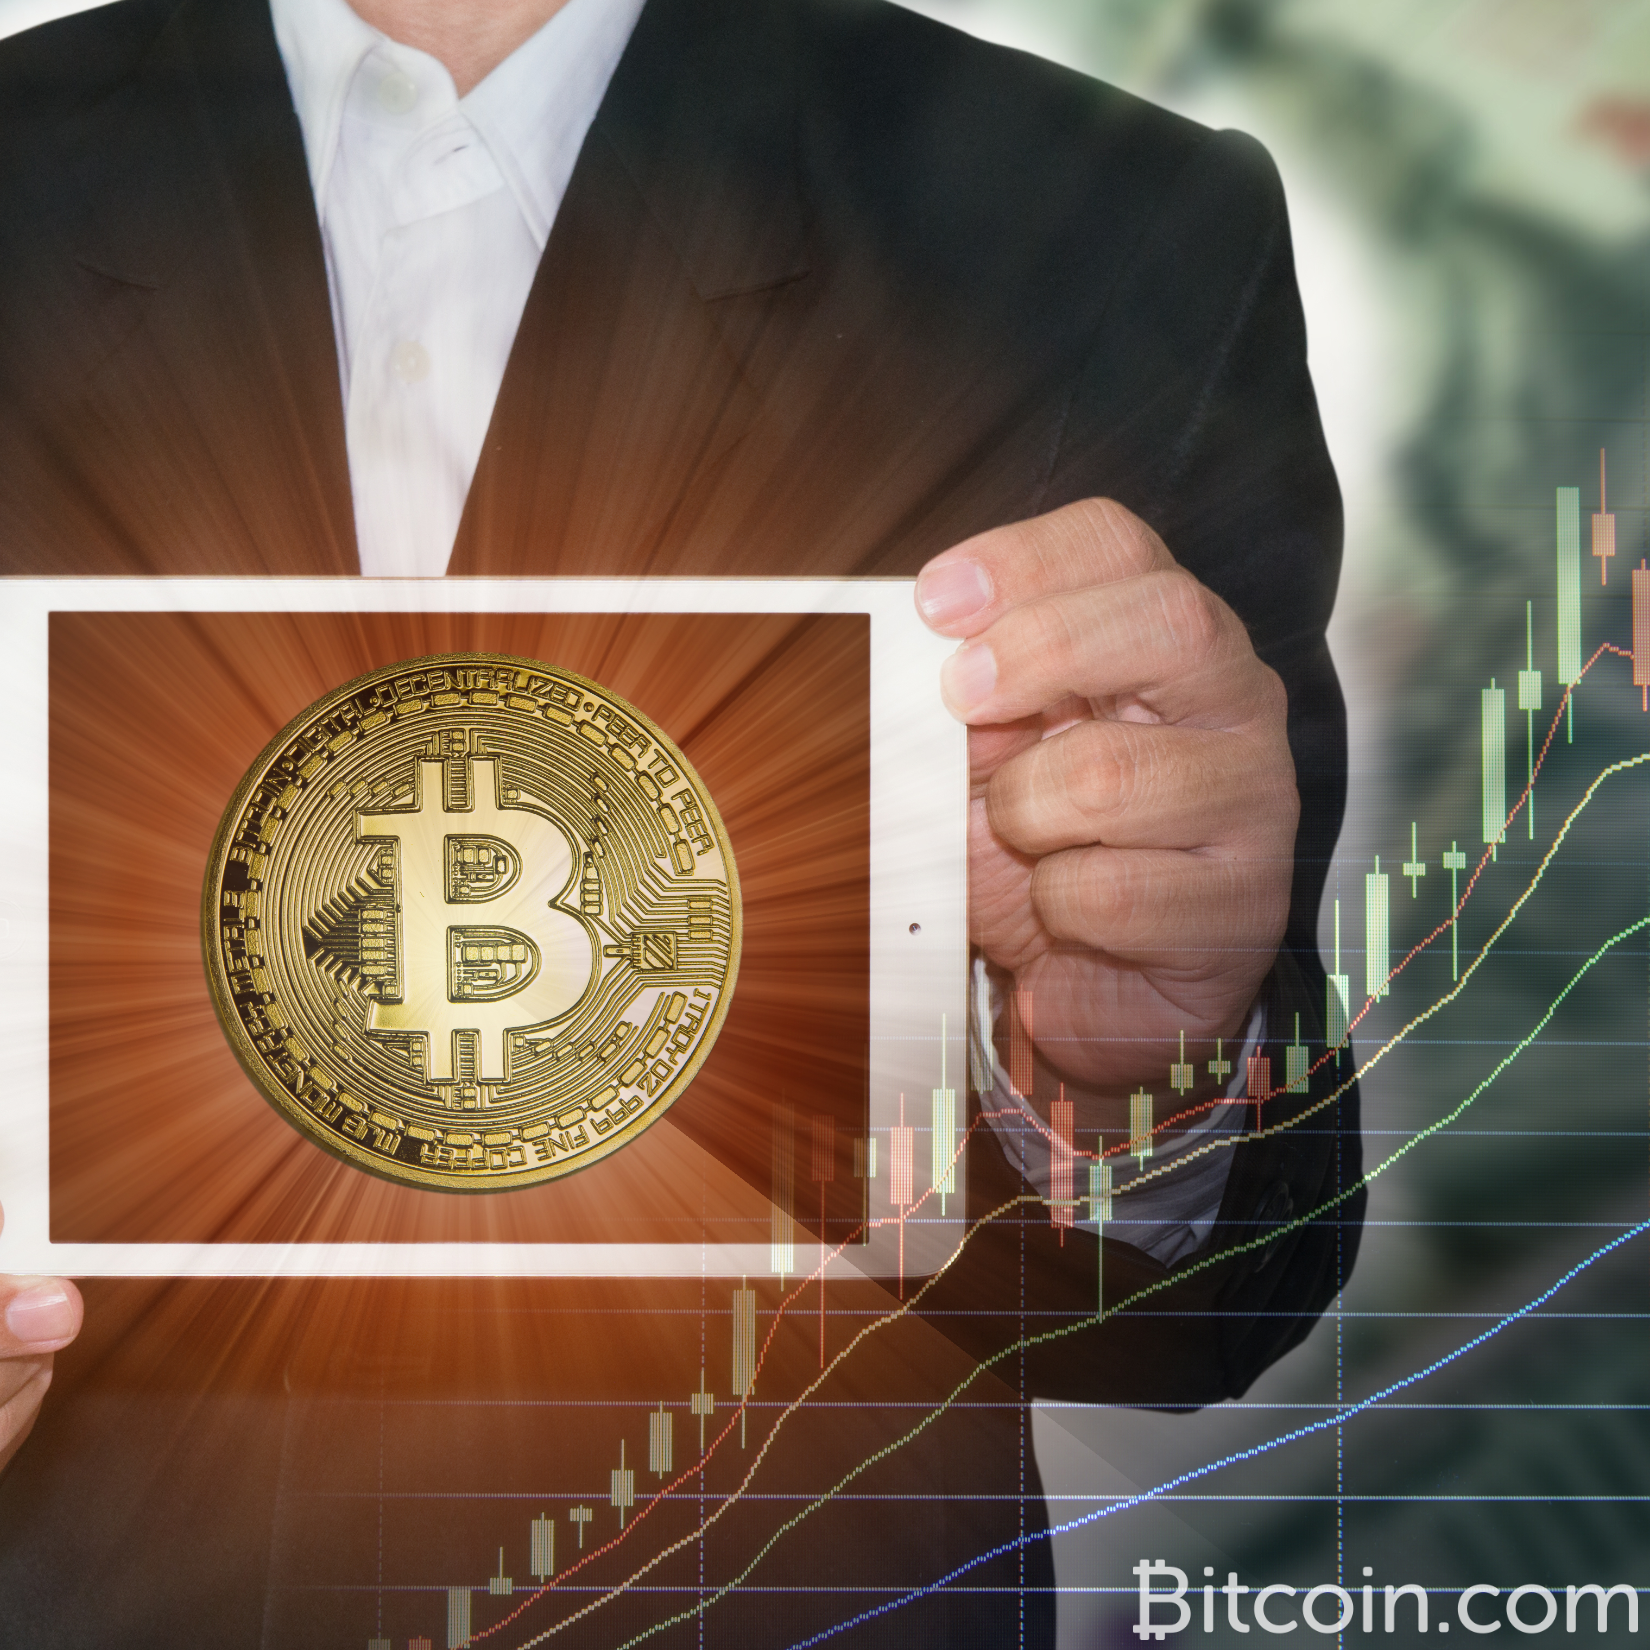 Korean Regulation Fails to Shake Bitcoin Market But Could Wipe Out Some Exchanges